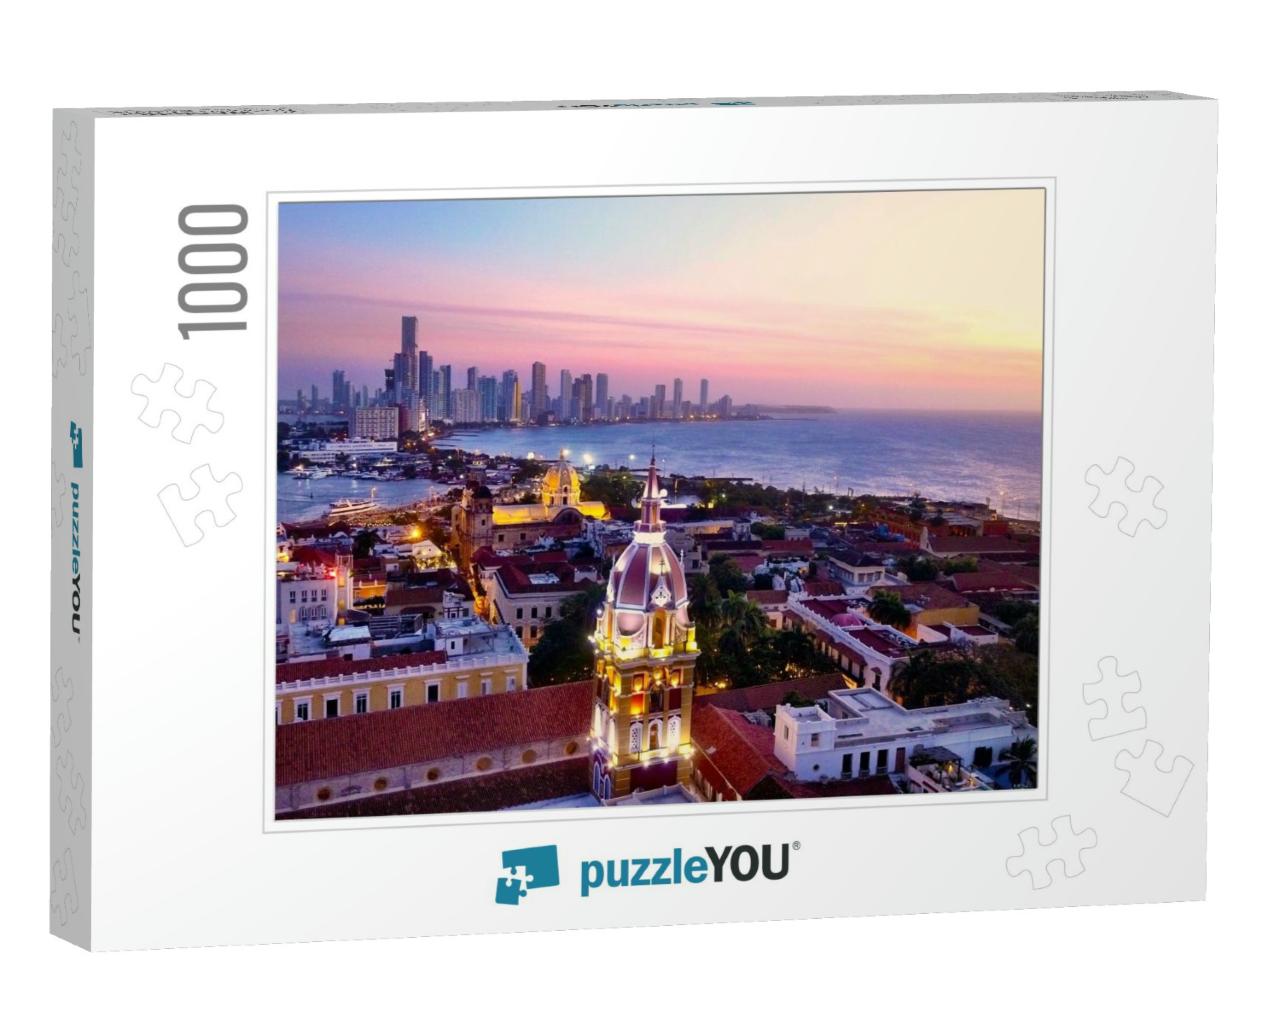 Cartagena Skyline Colombia At Sunset... Jigsaw Puzzle with 1000 pieces